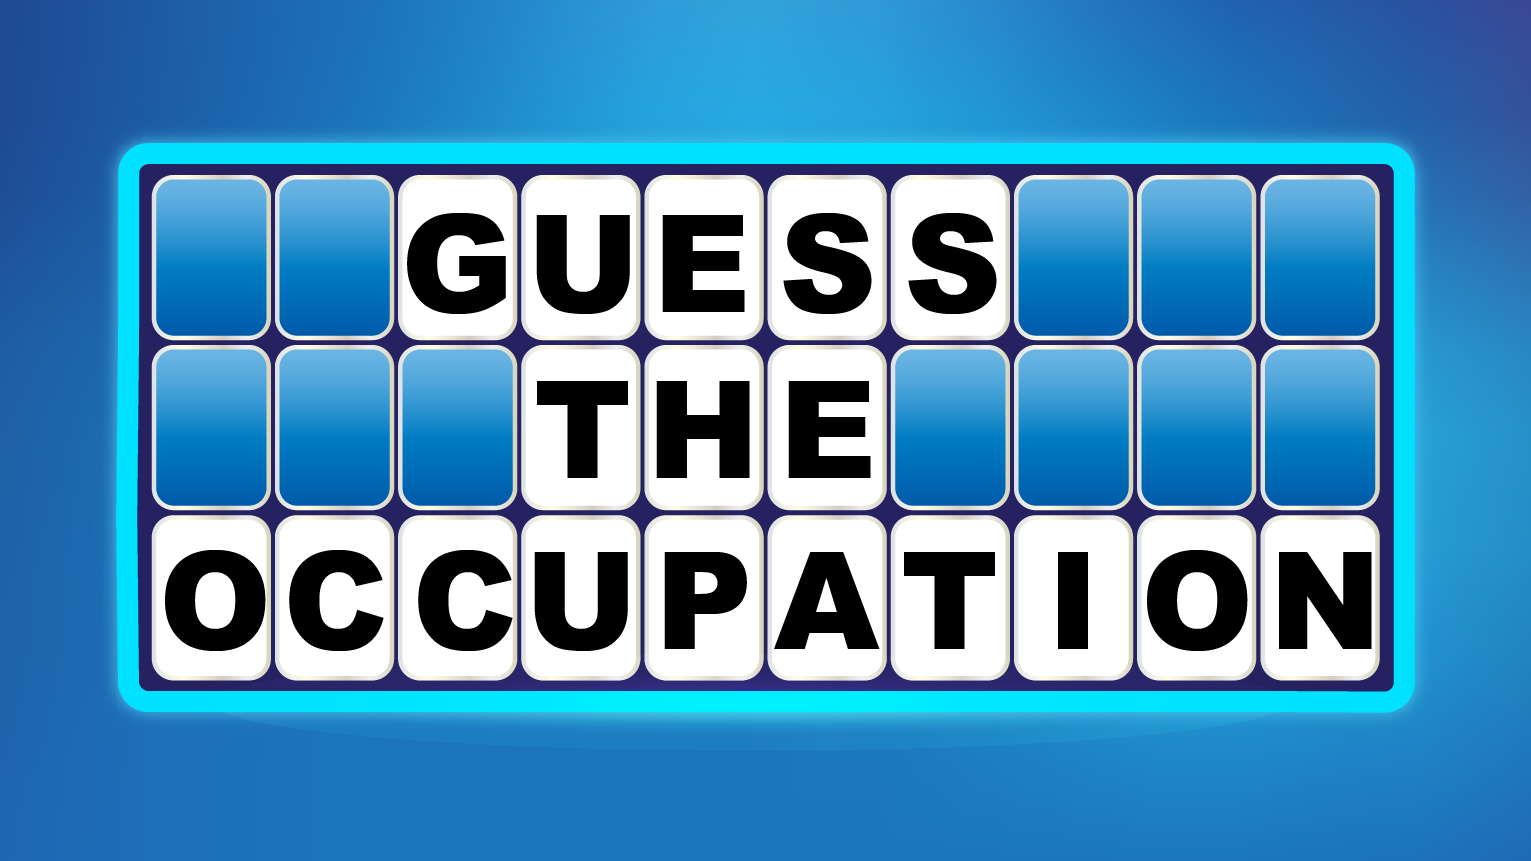 Word Guessing Game, Guess the Occupation